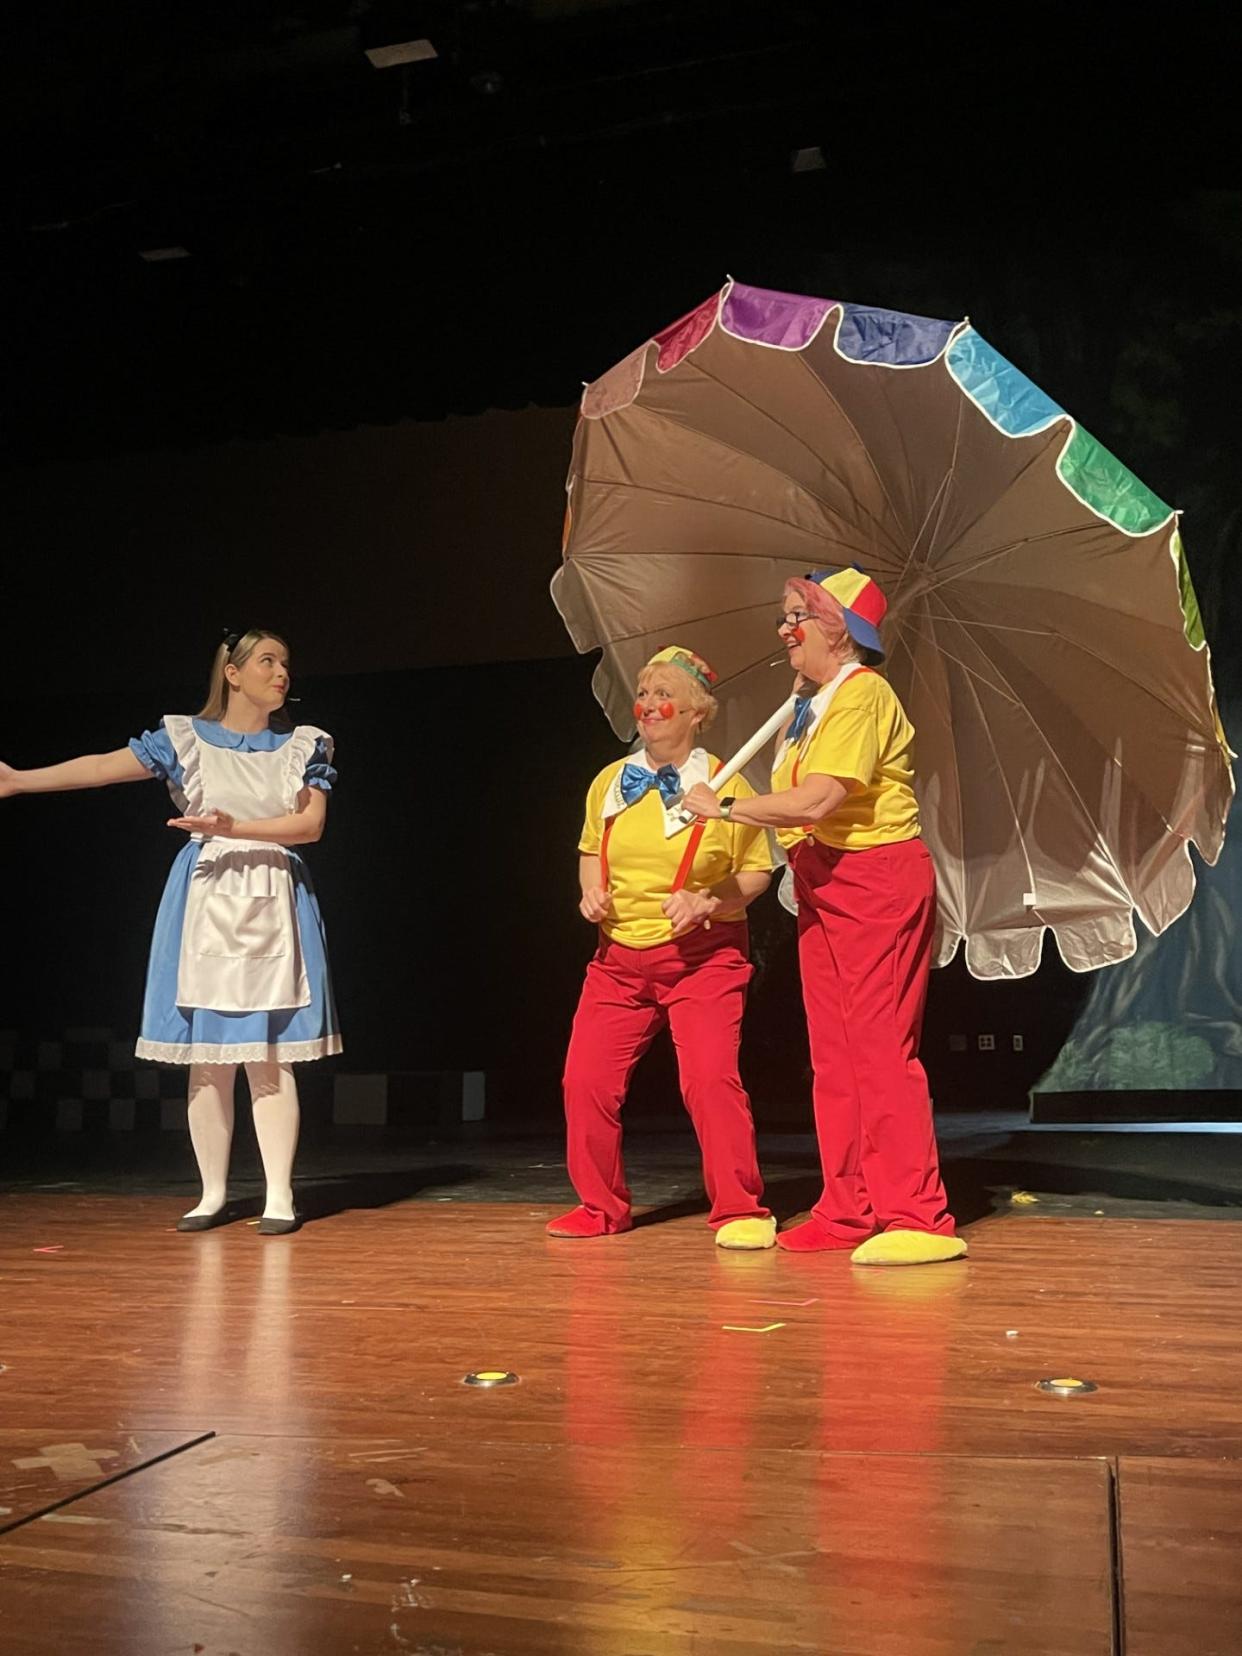 Alice, left, played by Elizabeth Jordan, tries to get information from Tweedledum, played by Lynn Brown, center, and Tweedledee, played by Linda Knight.